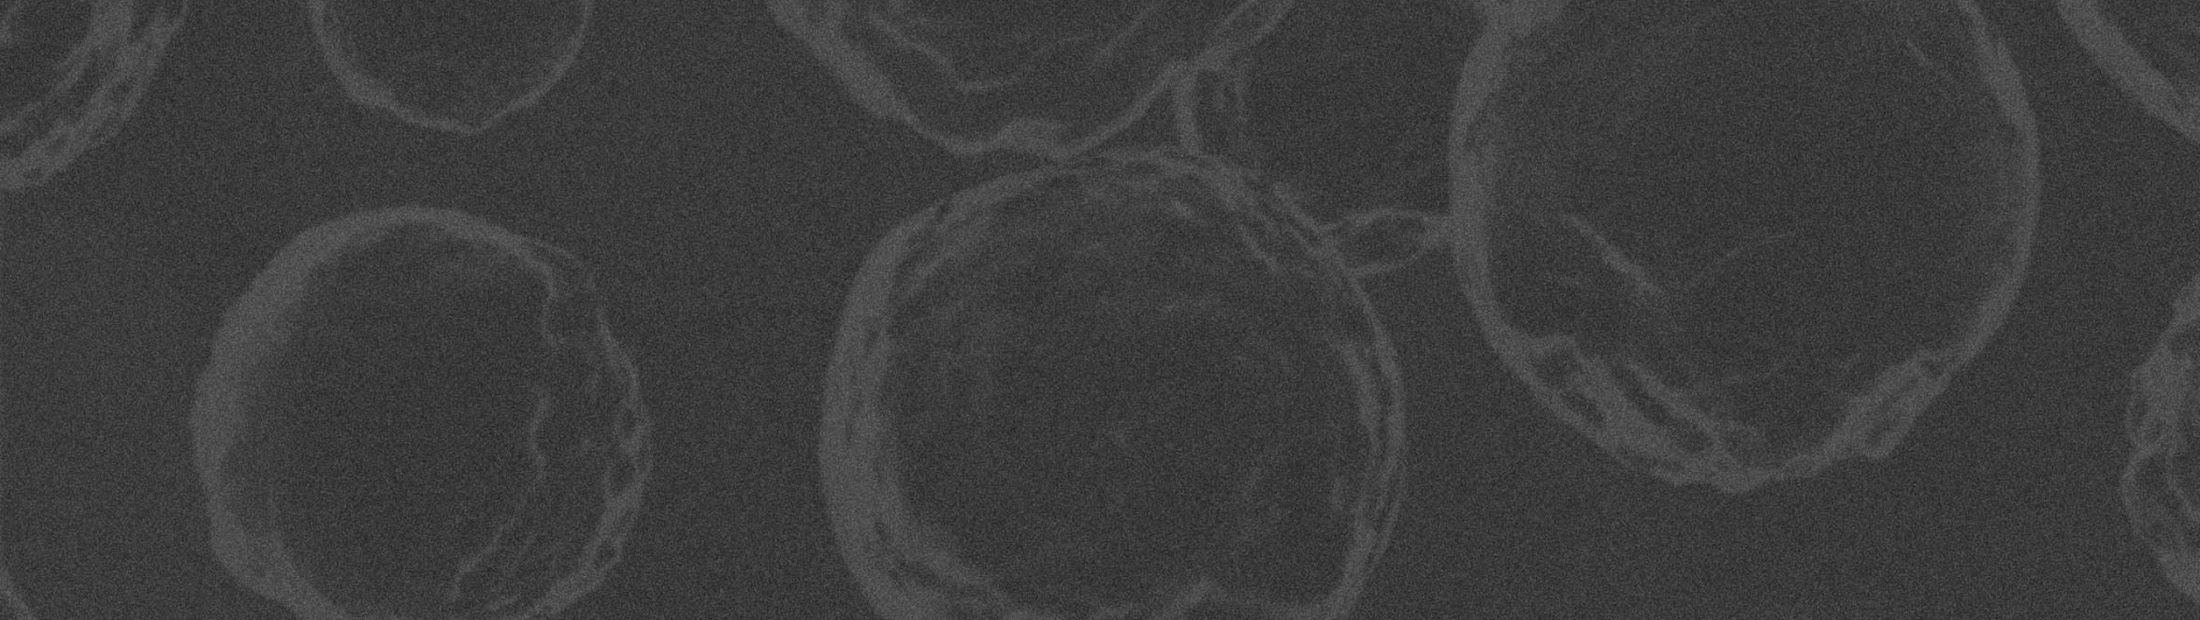 Grayscale microscope image of cells.